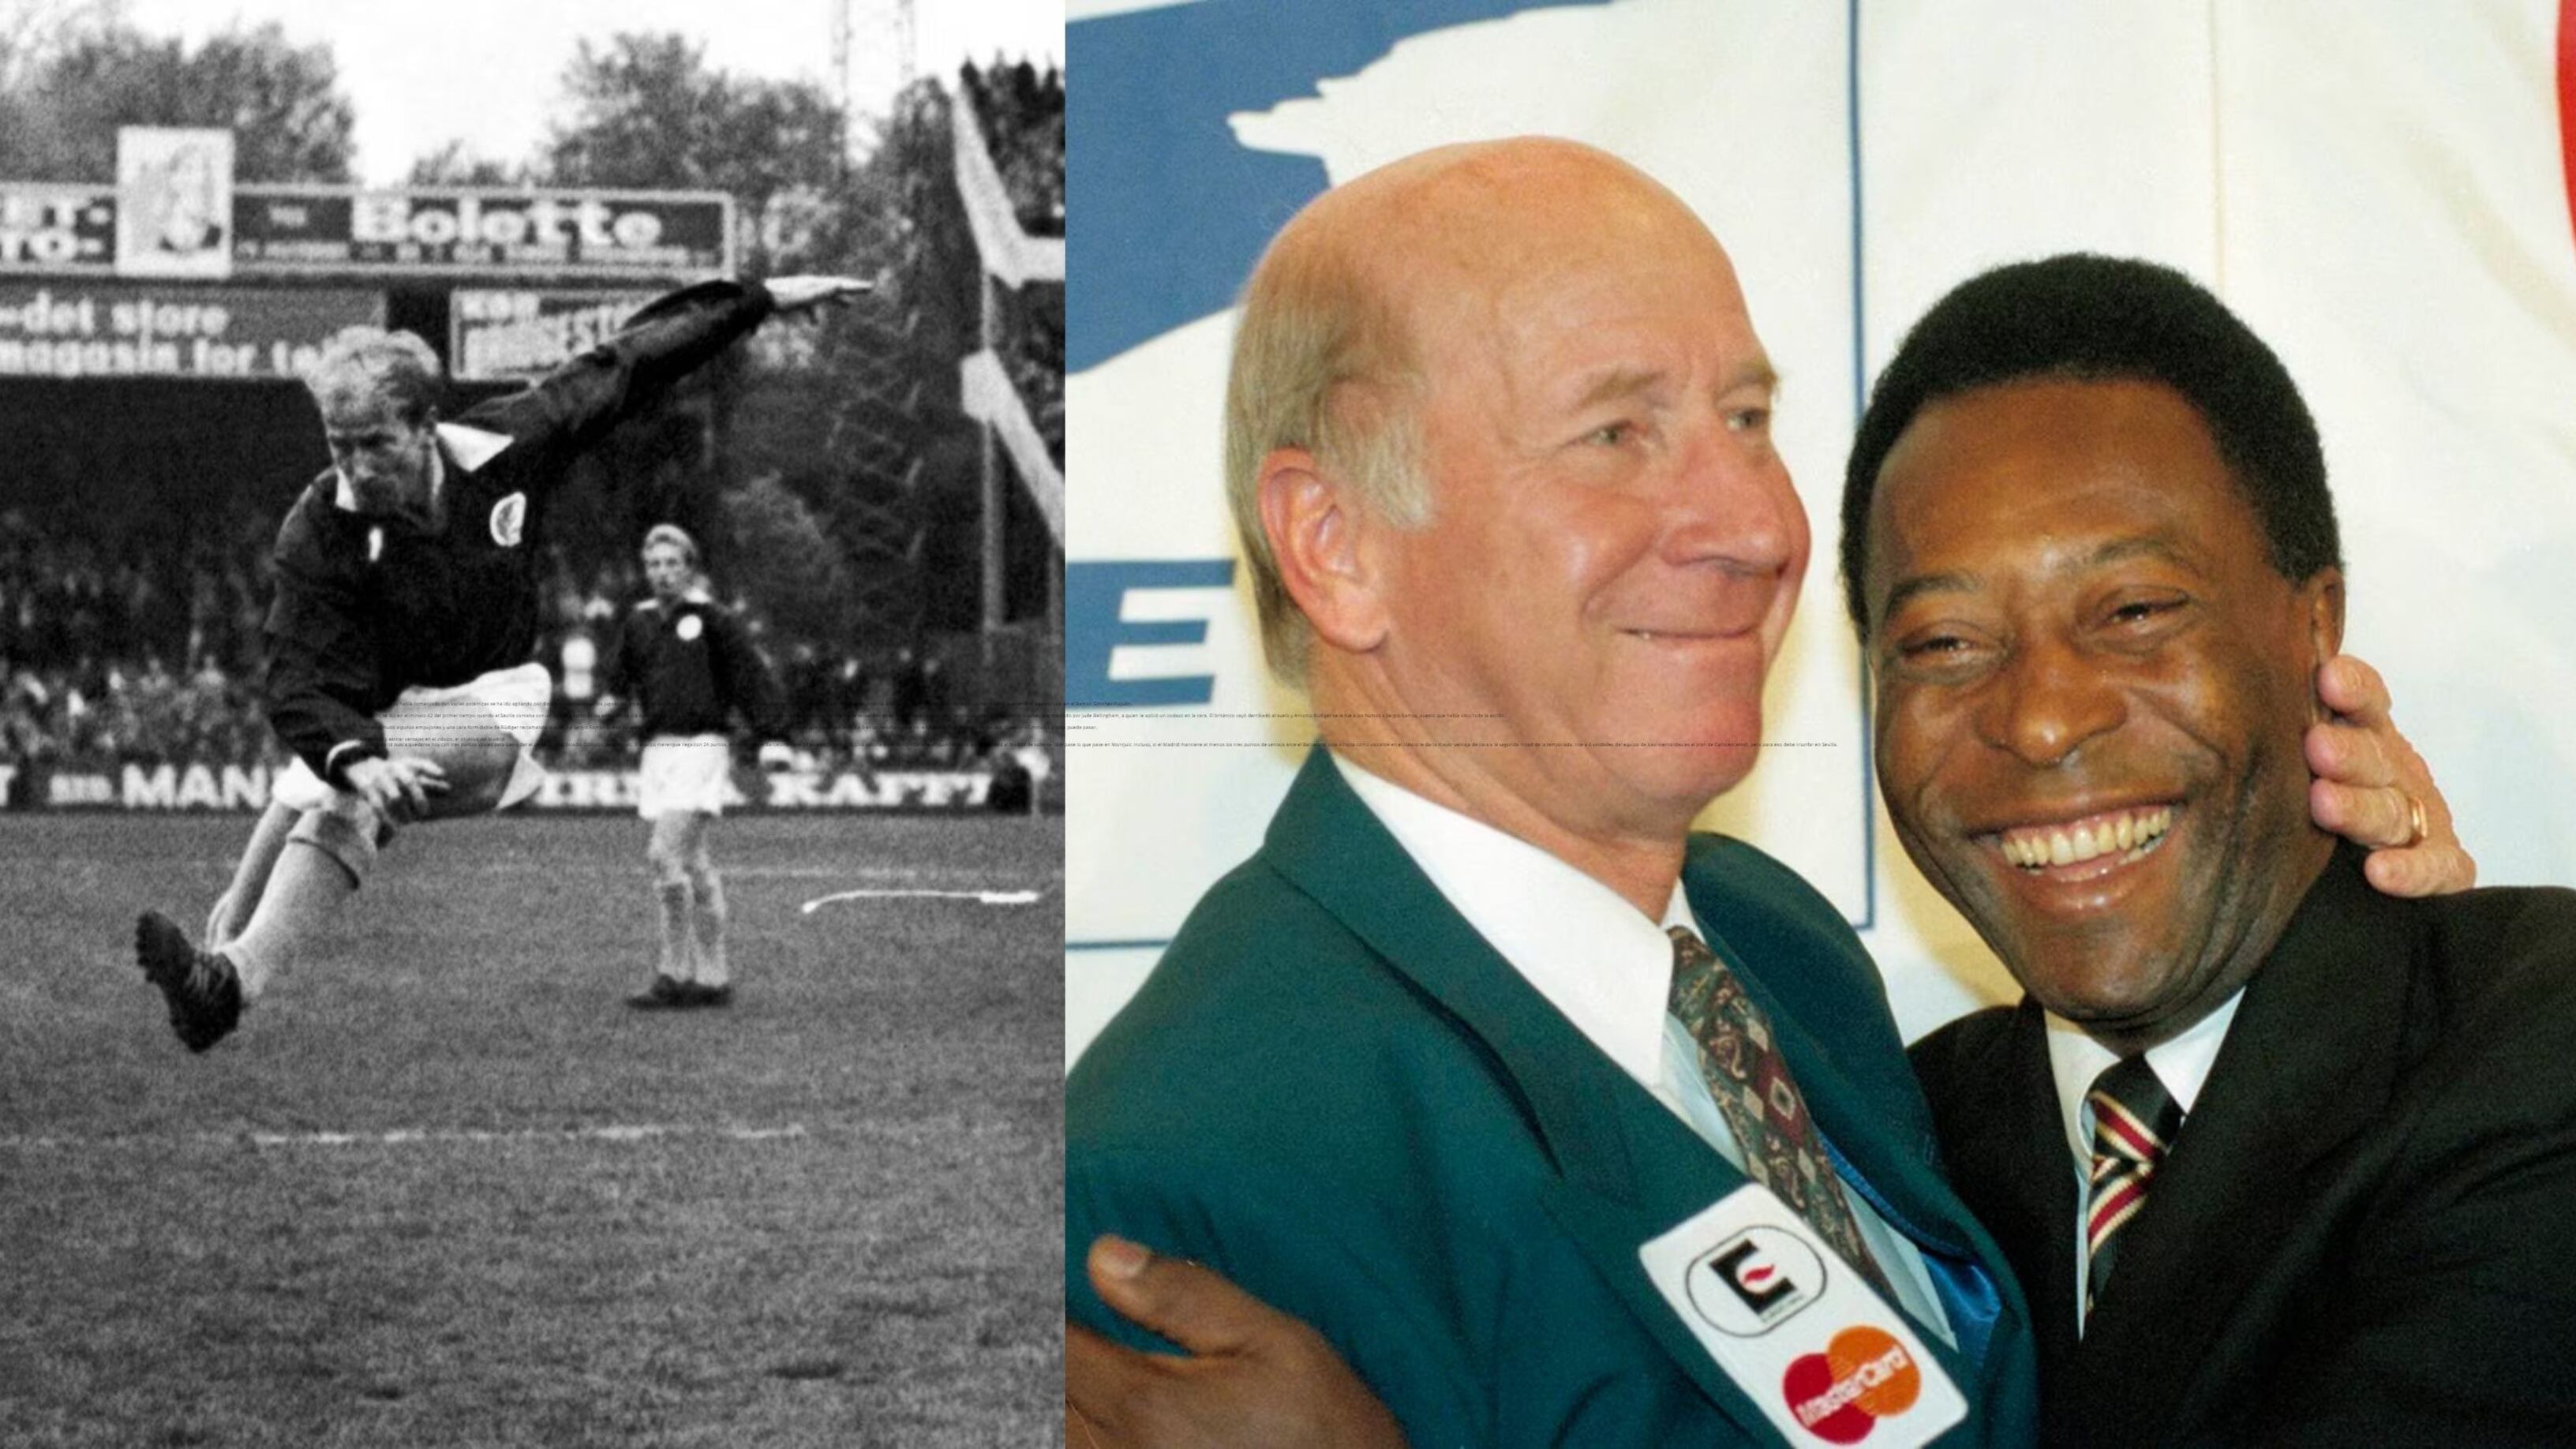 Manchester United legend, he was Pelé's idol and now he loses his life